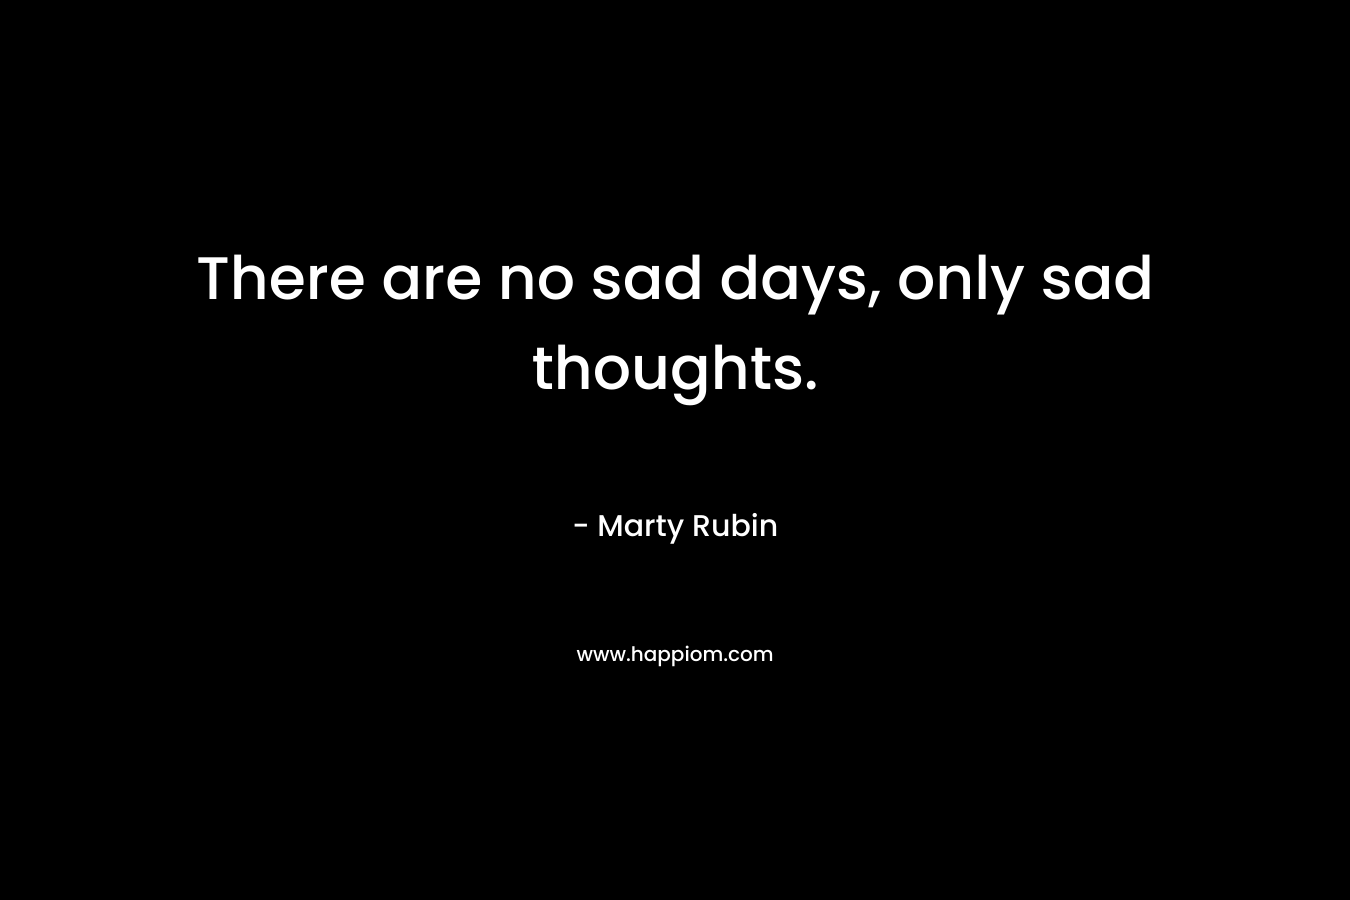 There are no sad days, only sad thoughts.